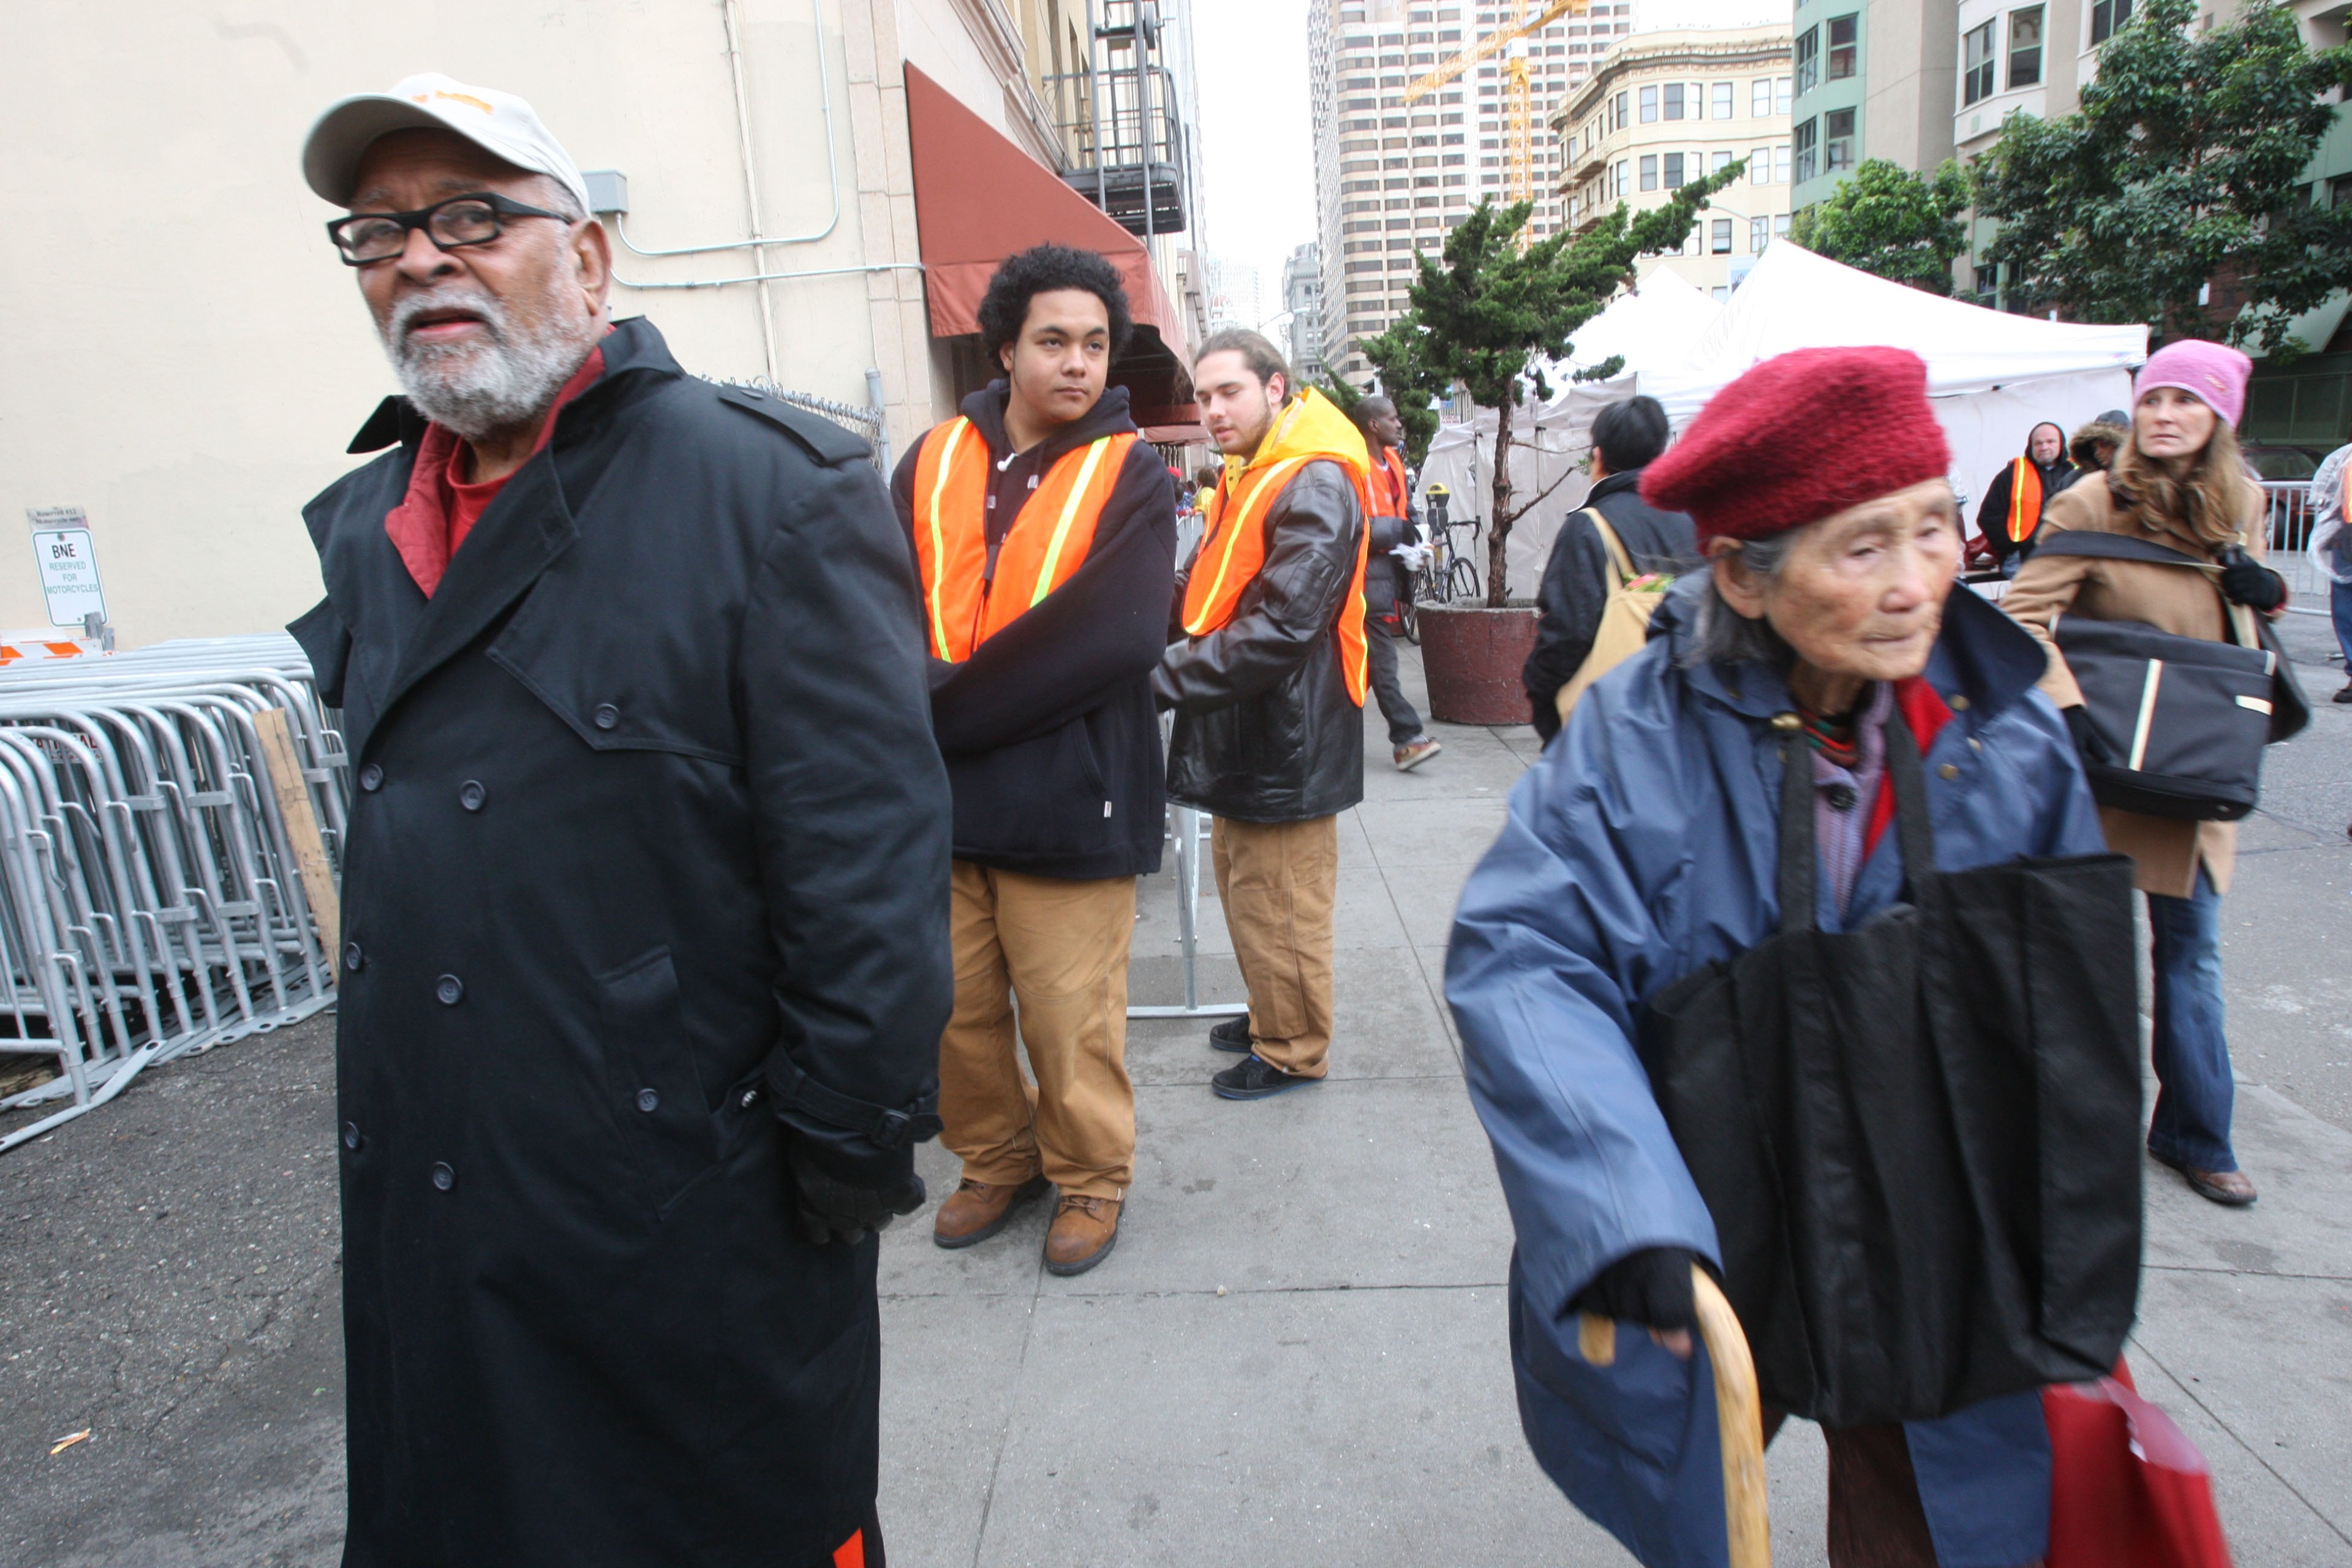 An elderly lady using a cane walks past various onlookers, including two men in high-visibility vests.